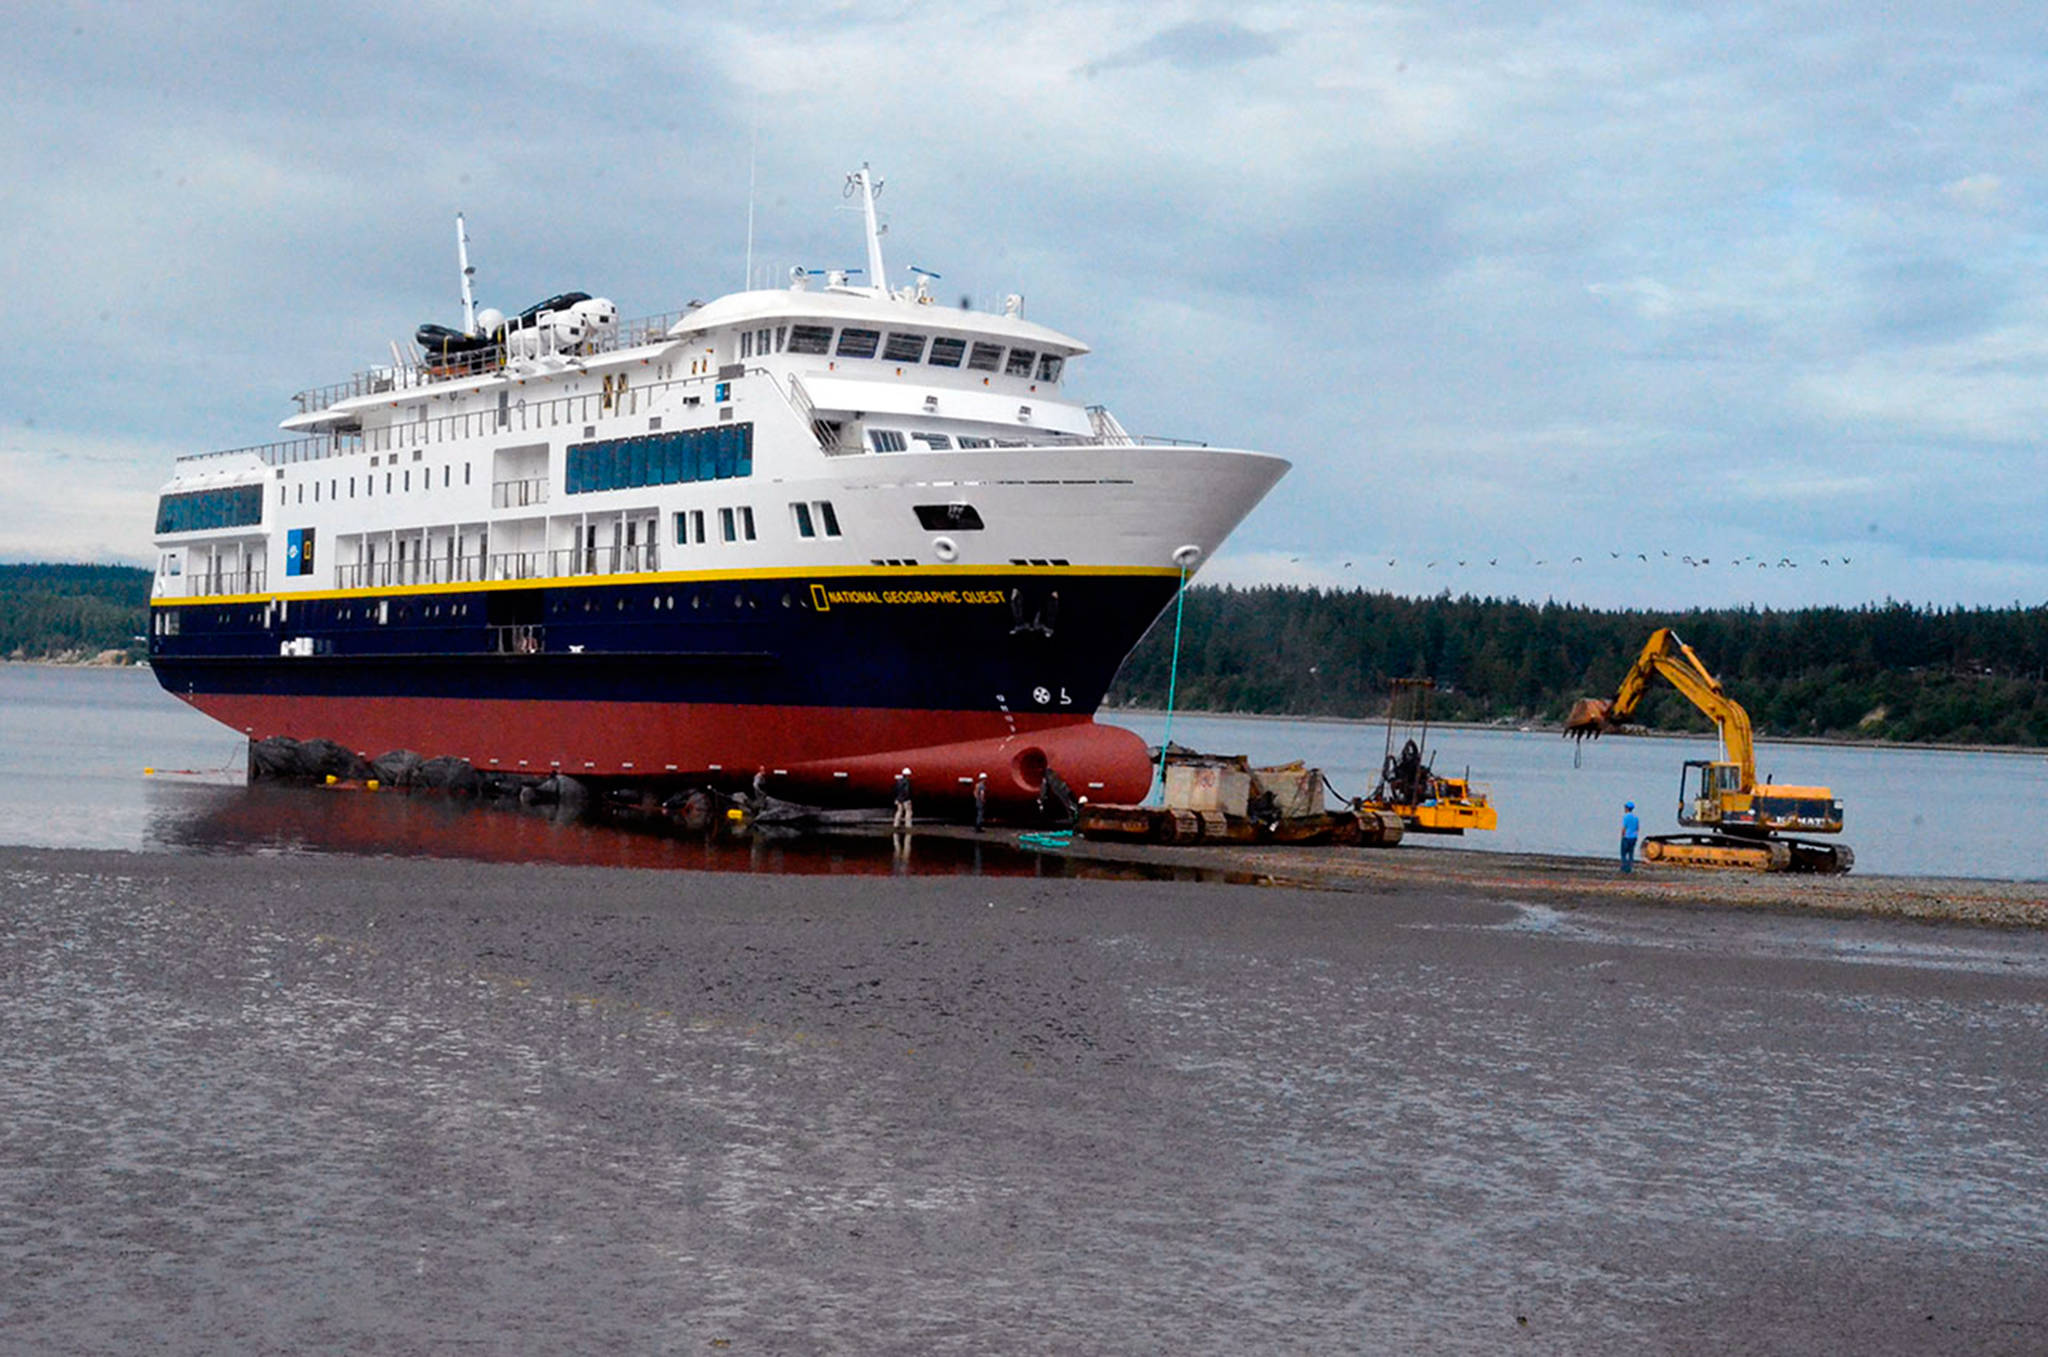 National Geographic boat was damaged during launch; cruise company cancels scheduled tours